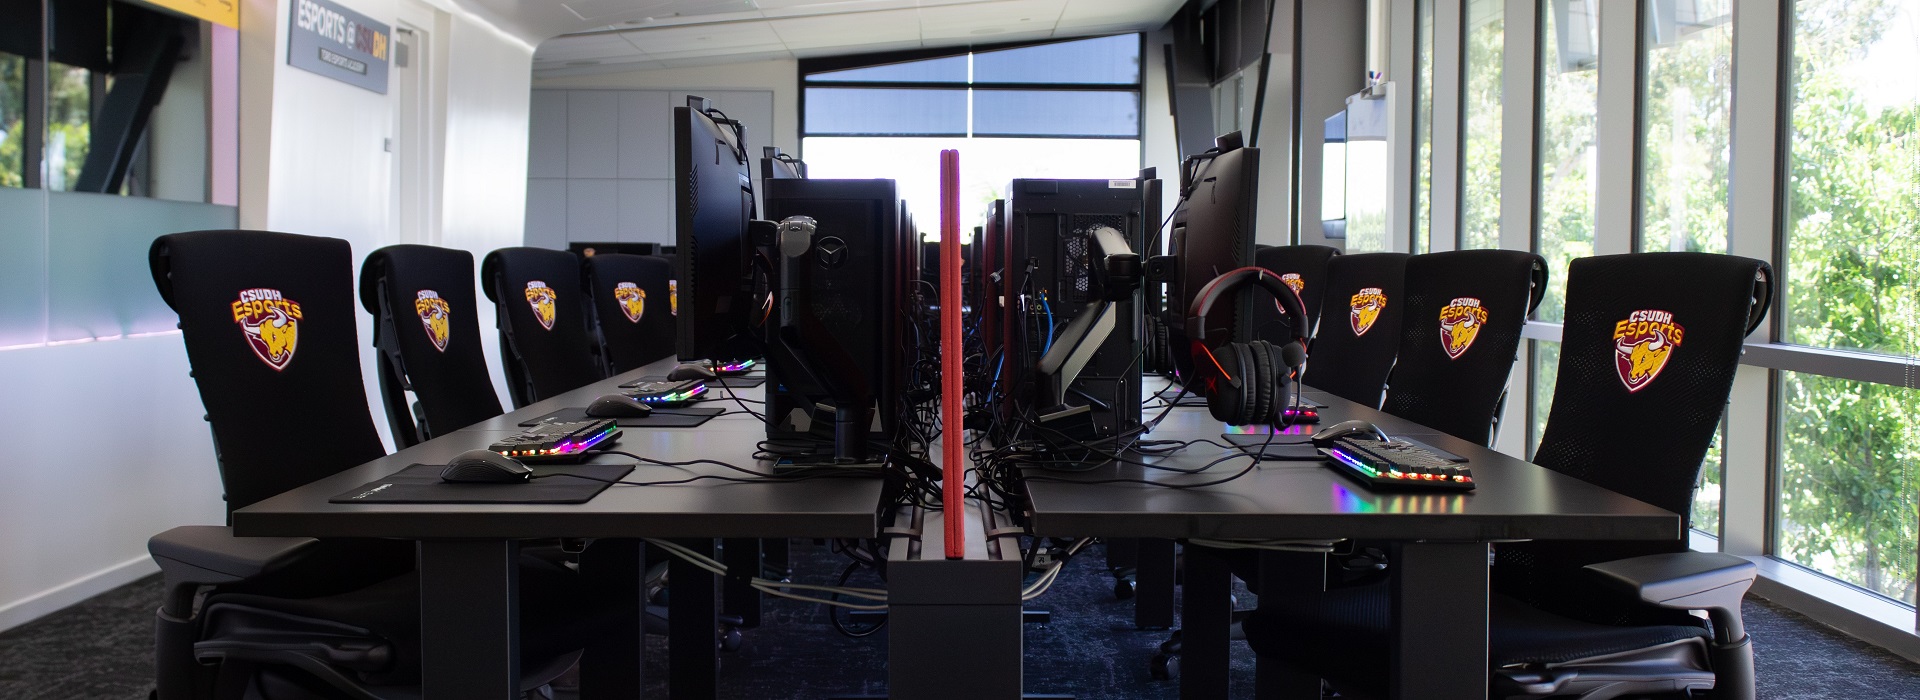 A view of the Toro Esports Academy showing a bank of CPUs with monitors and headphones hanging off to the side. There are chairs witht the CSUDH Esport logo o nthem.